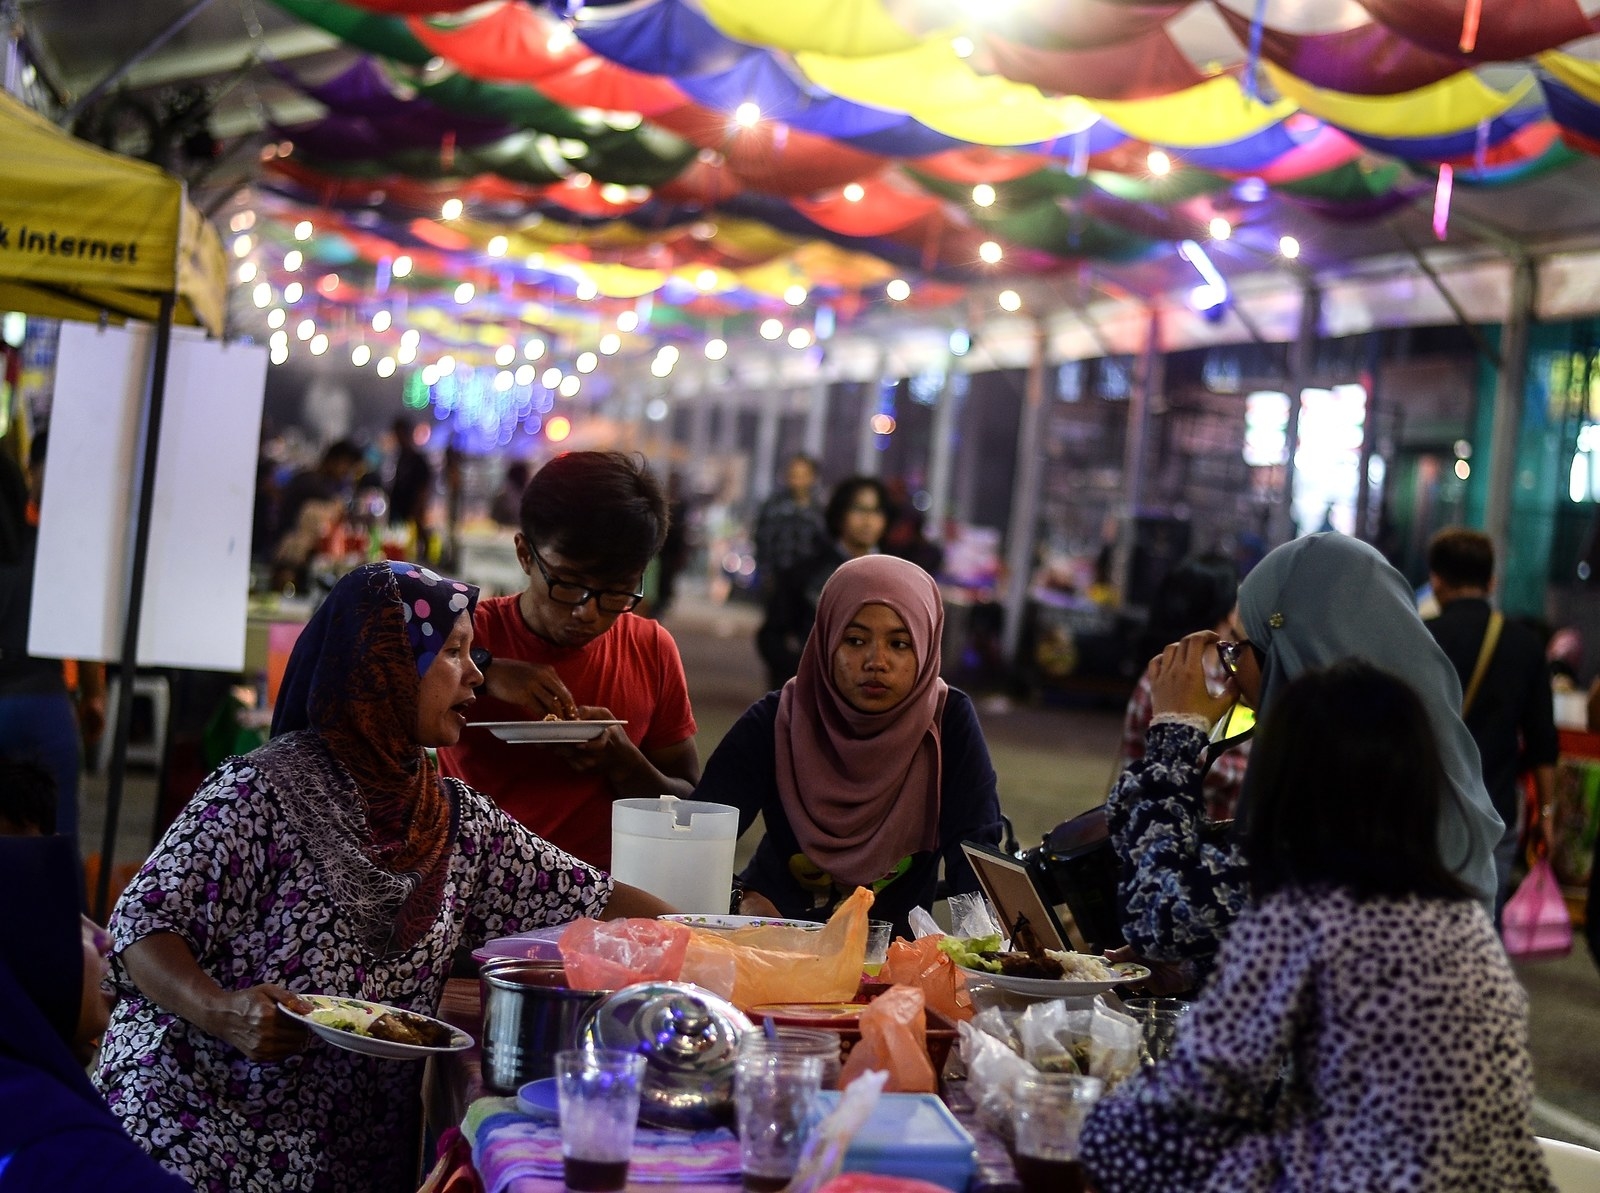 Malaysian Muslims break their fast on the first day of Ramadan. Manan Vatsyayana / AFP / Getty Images